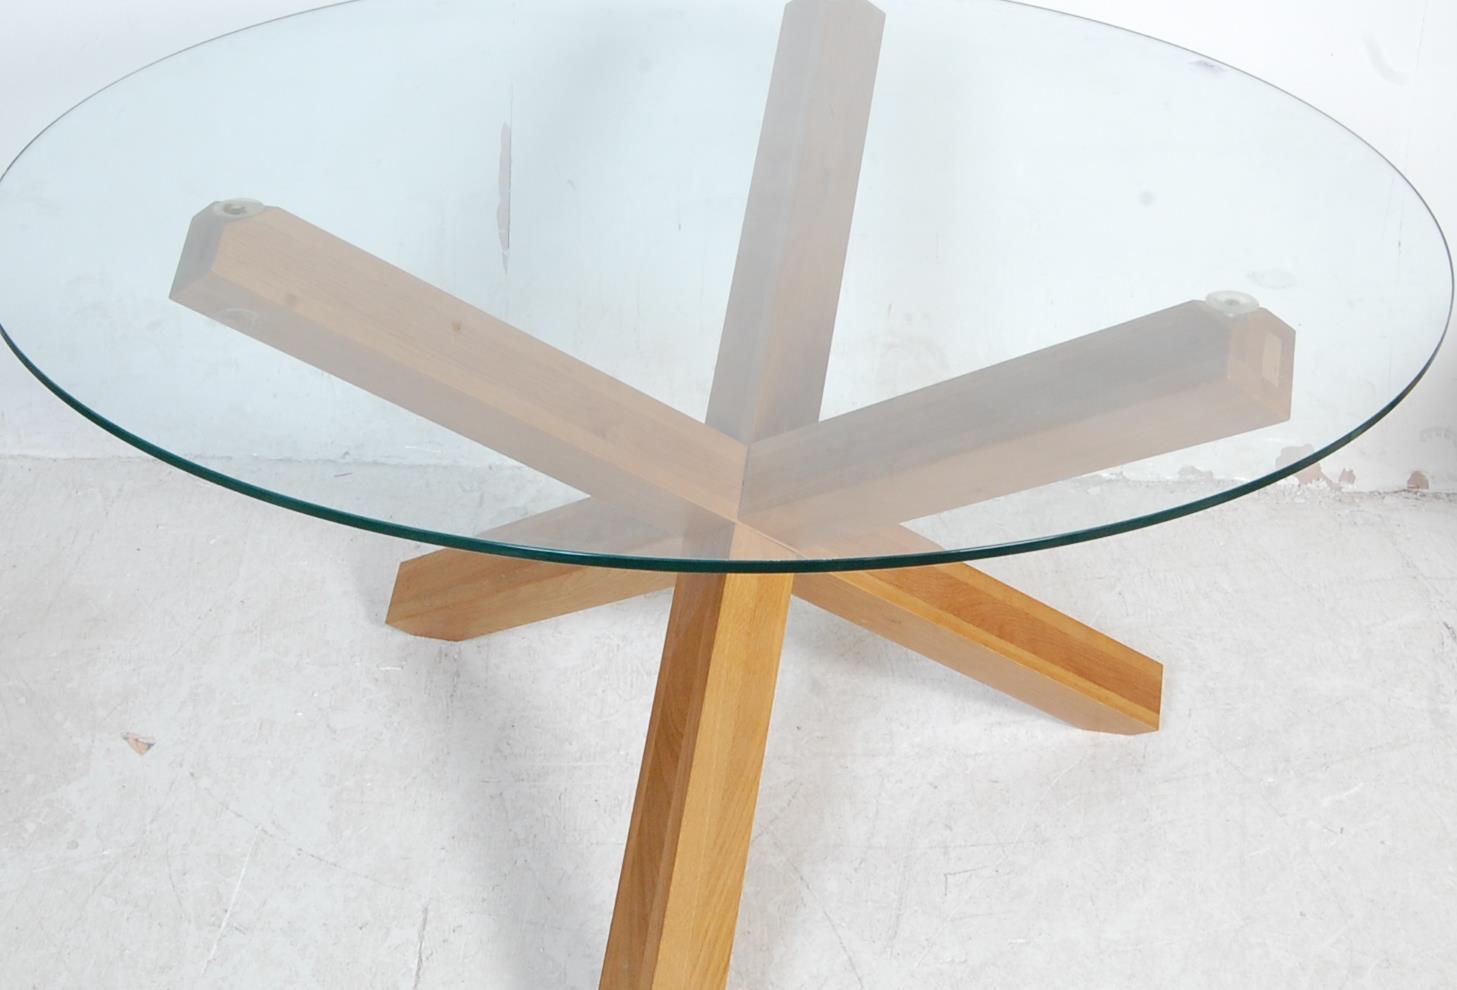 CONTEMPORARY GLASS AND WOOD DINING TABLE - Image 2 of 5